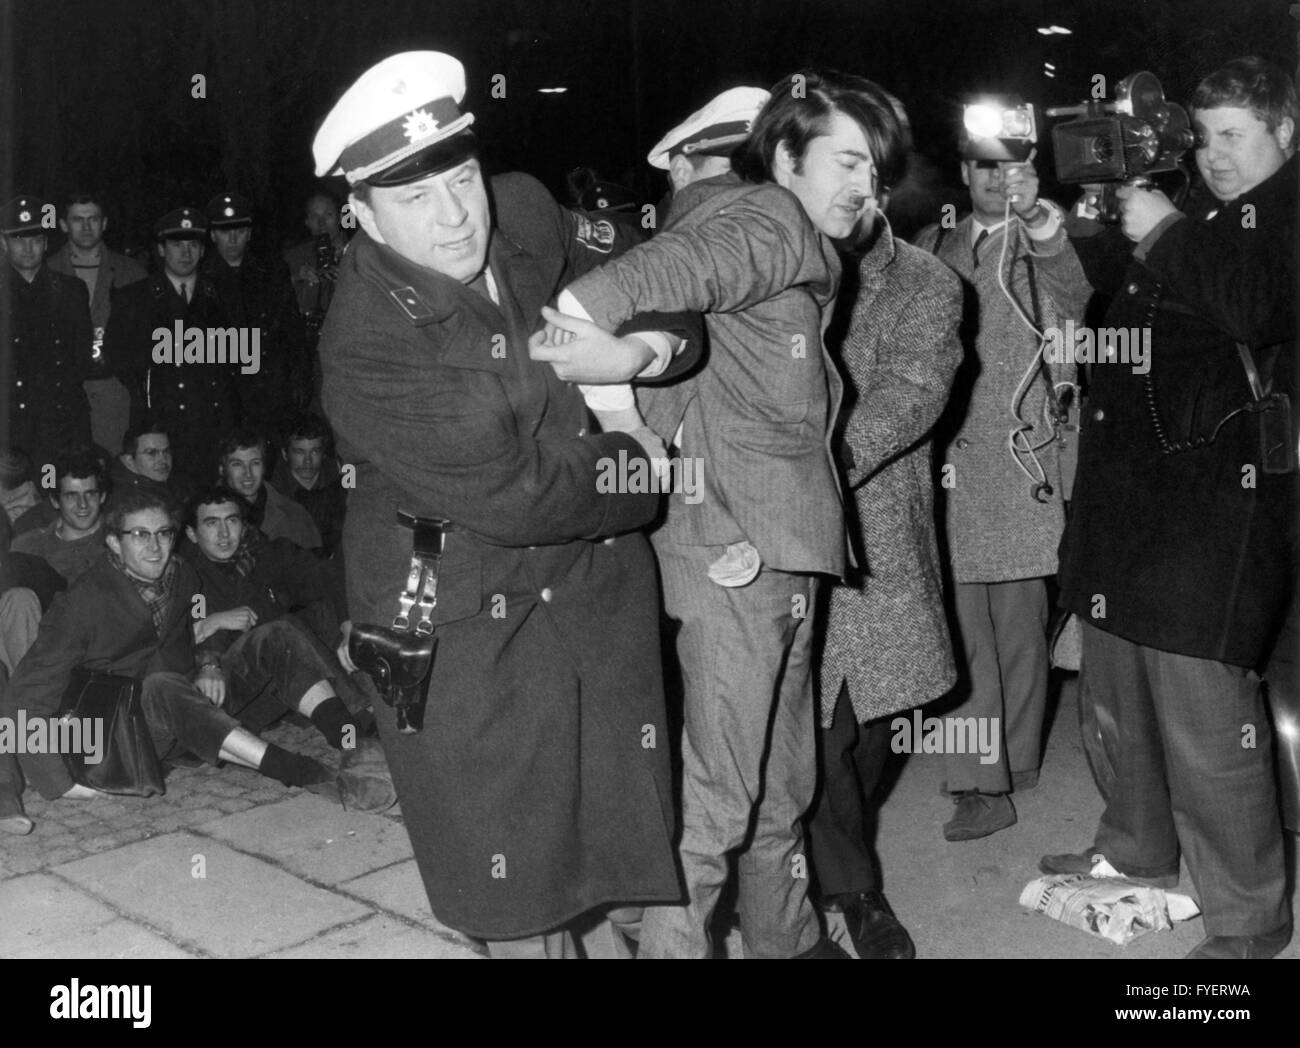 A demonstrant is arrested in front of the America House in Munich on the 8th of February in 1968. There were riots shortly before the opening of an exhibition in the course of protests against Vietnam War. Stock Photo